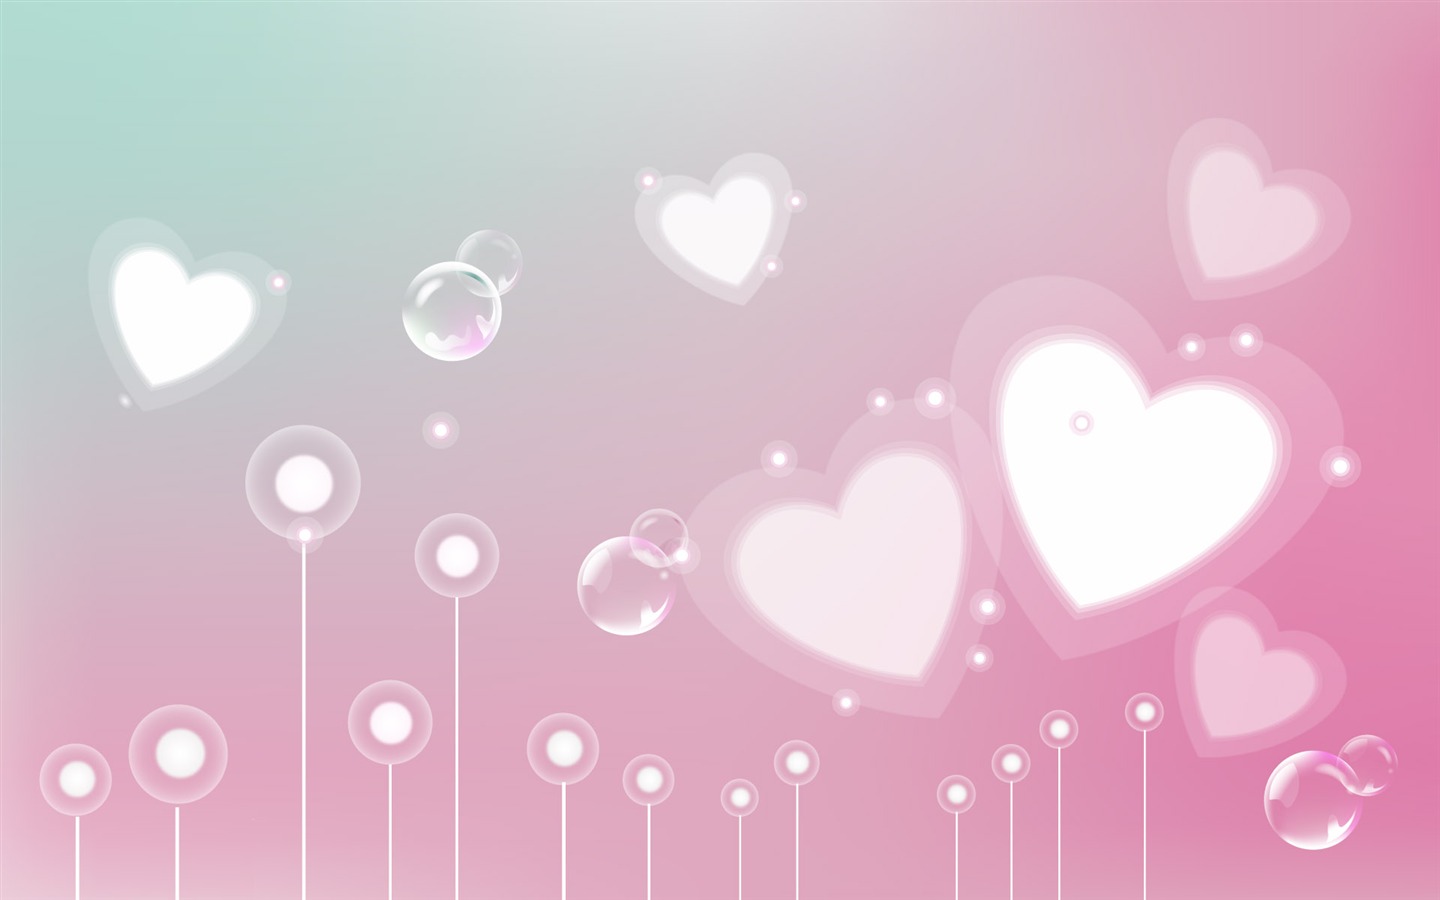 Valentine's Day Love Theme Wallpapers (2) #18 - 1440x900